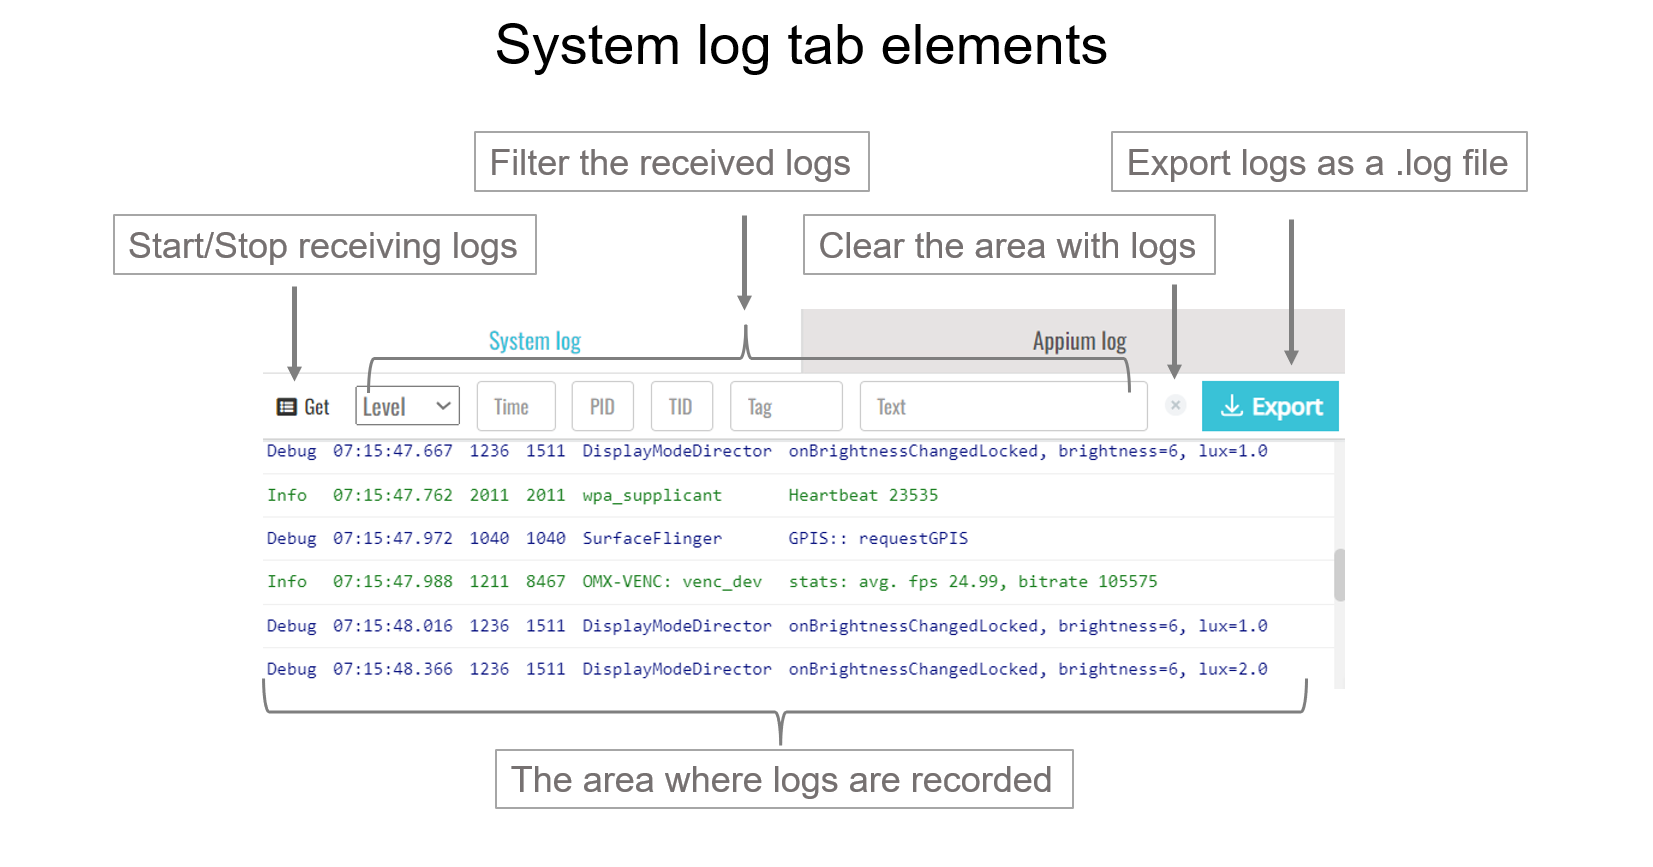 Elements of the System log tab